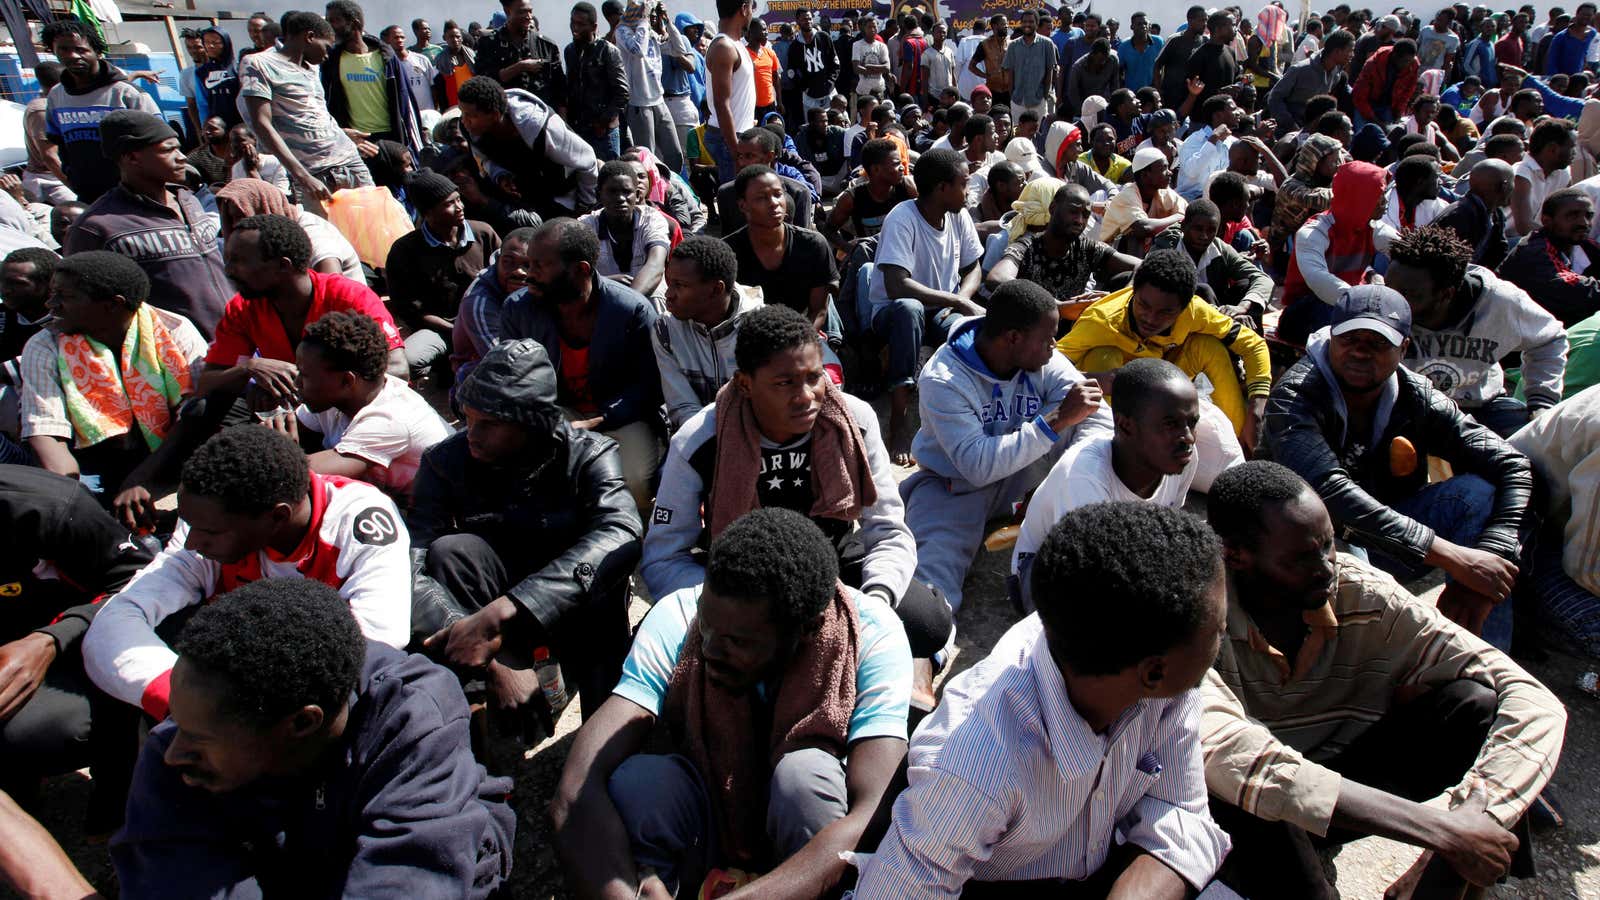 Illegal African migrants at a detention camp in Tripoli, Libya, March 22, 2017.